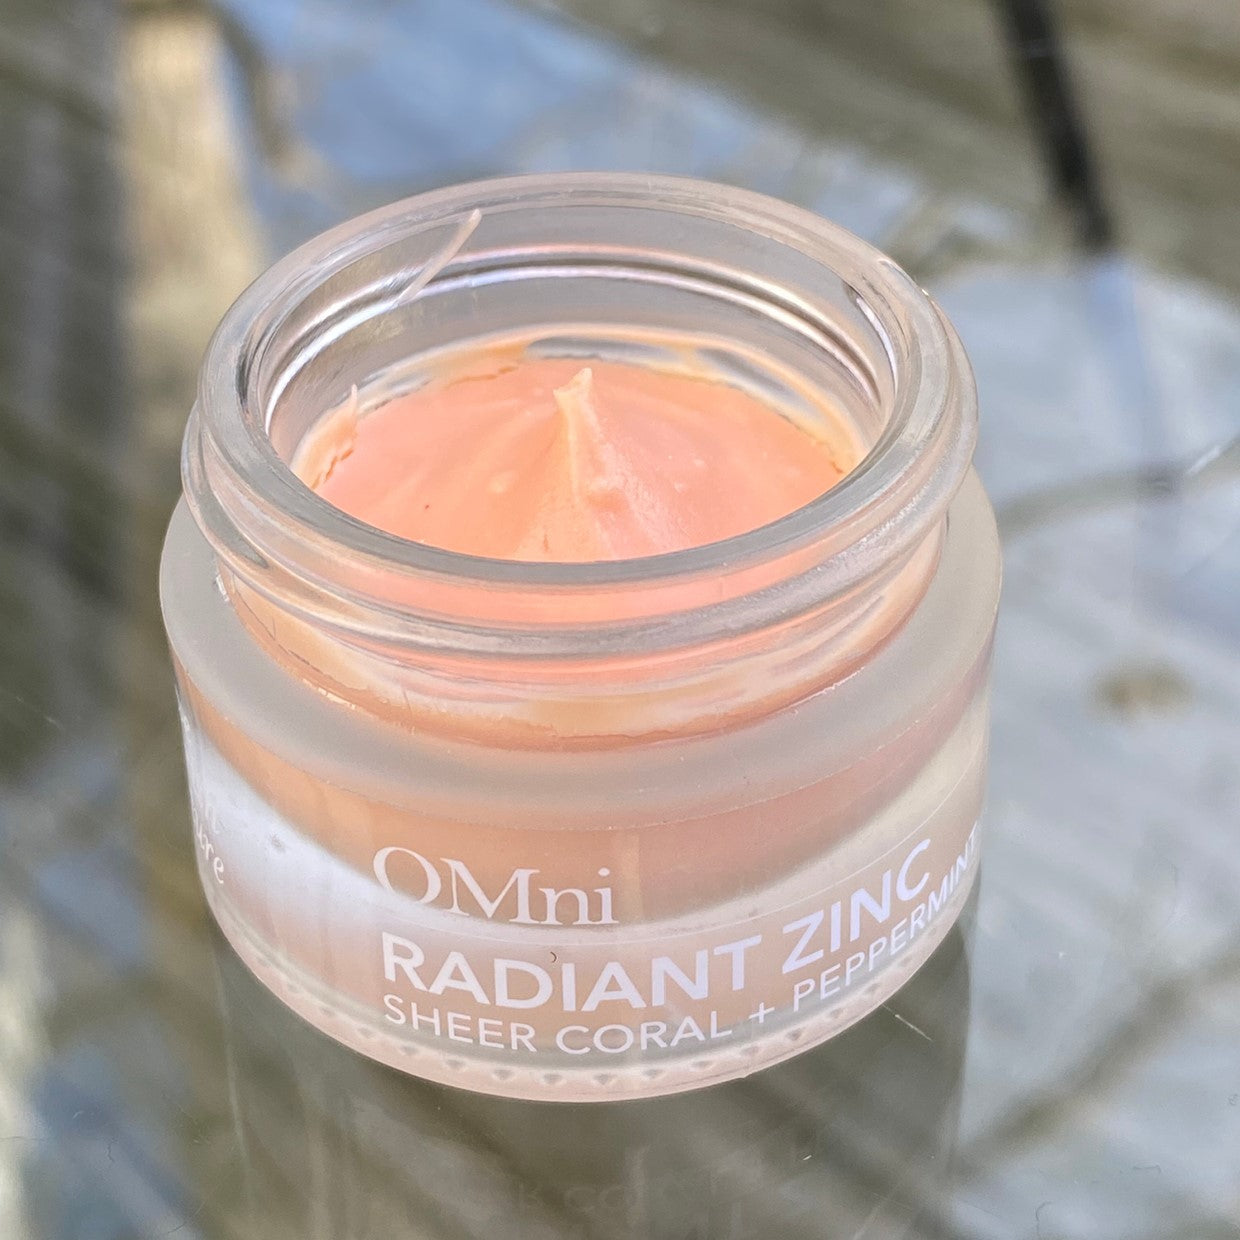 OMni Radiant Zinc Sheer Coral natural multi-use balm for dry lips and skin, highlighter on cheeks #2